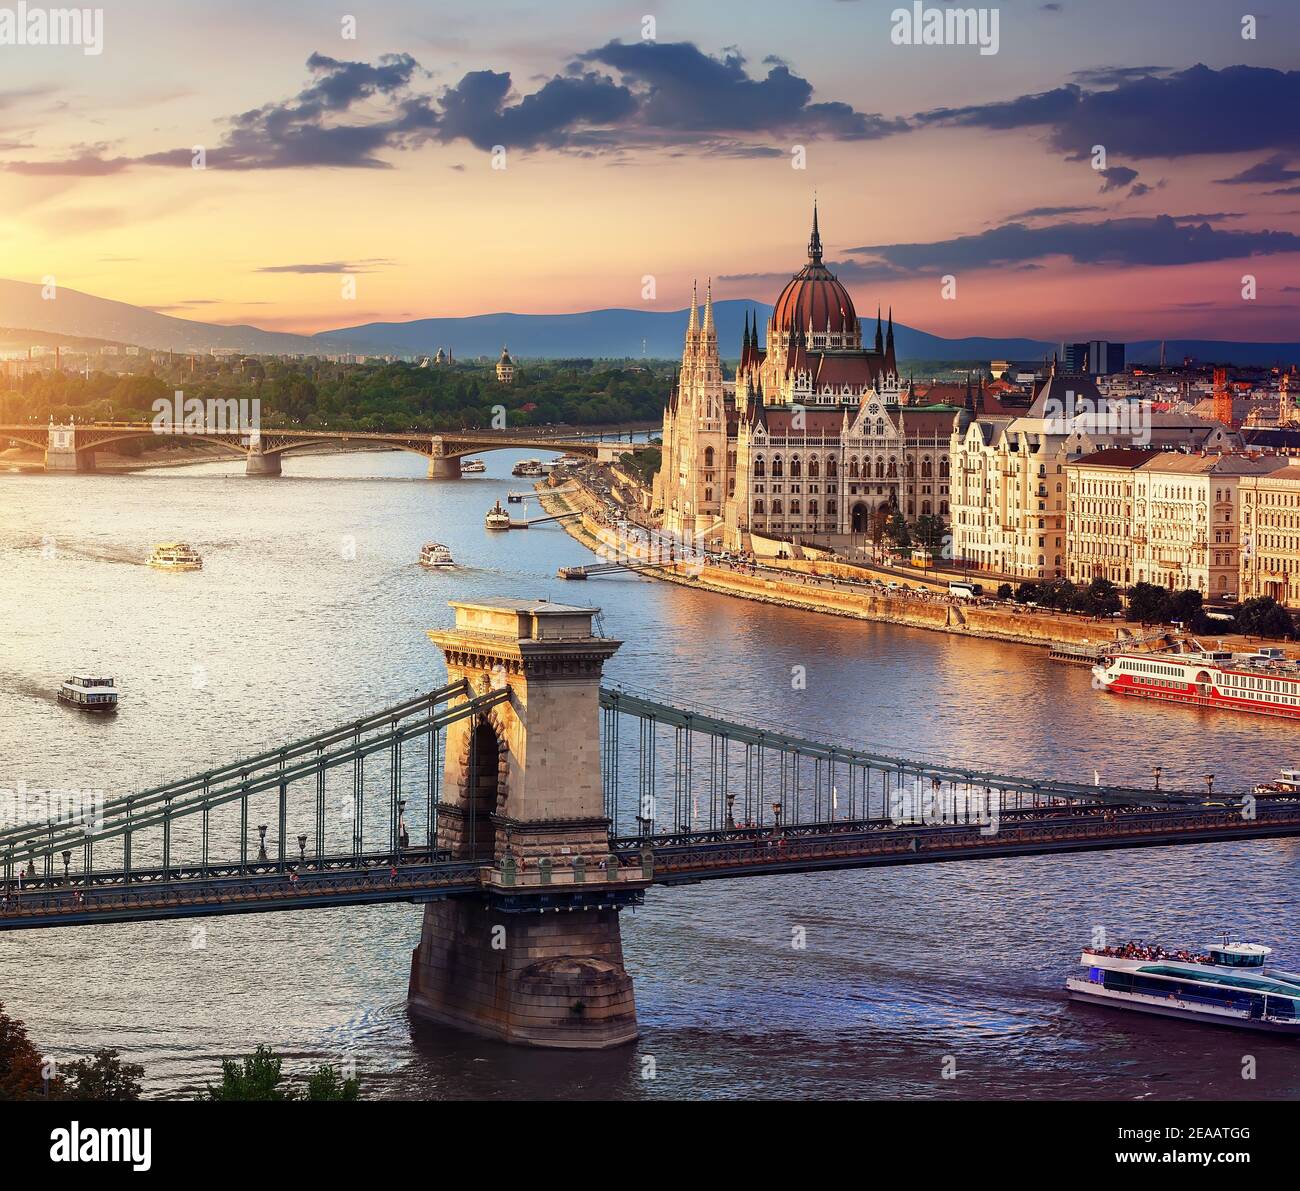 Parliament and famous bridges of Budapest at sunset, Hungary Stock Photo